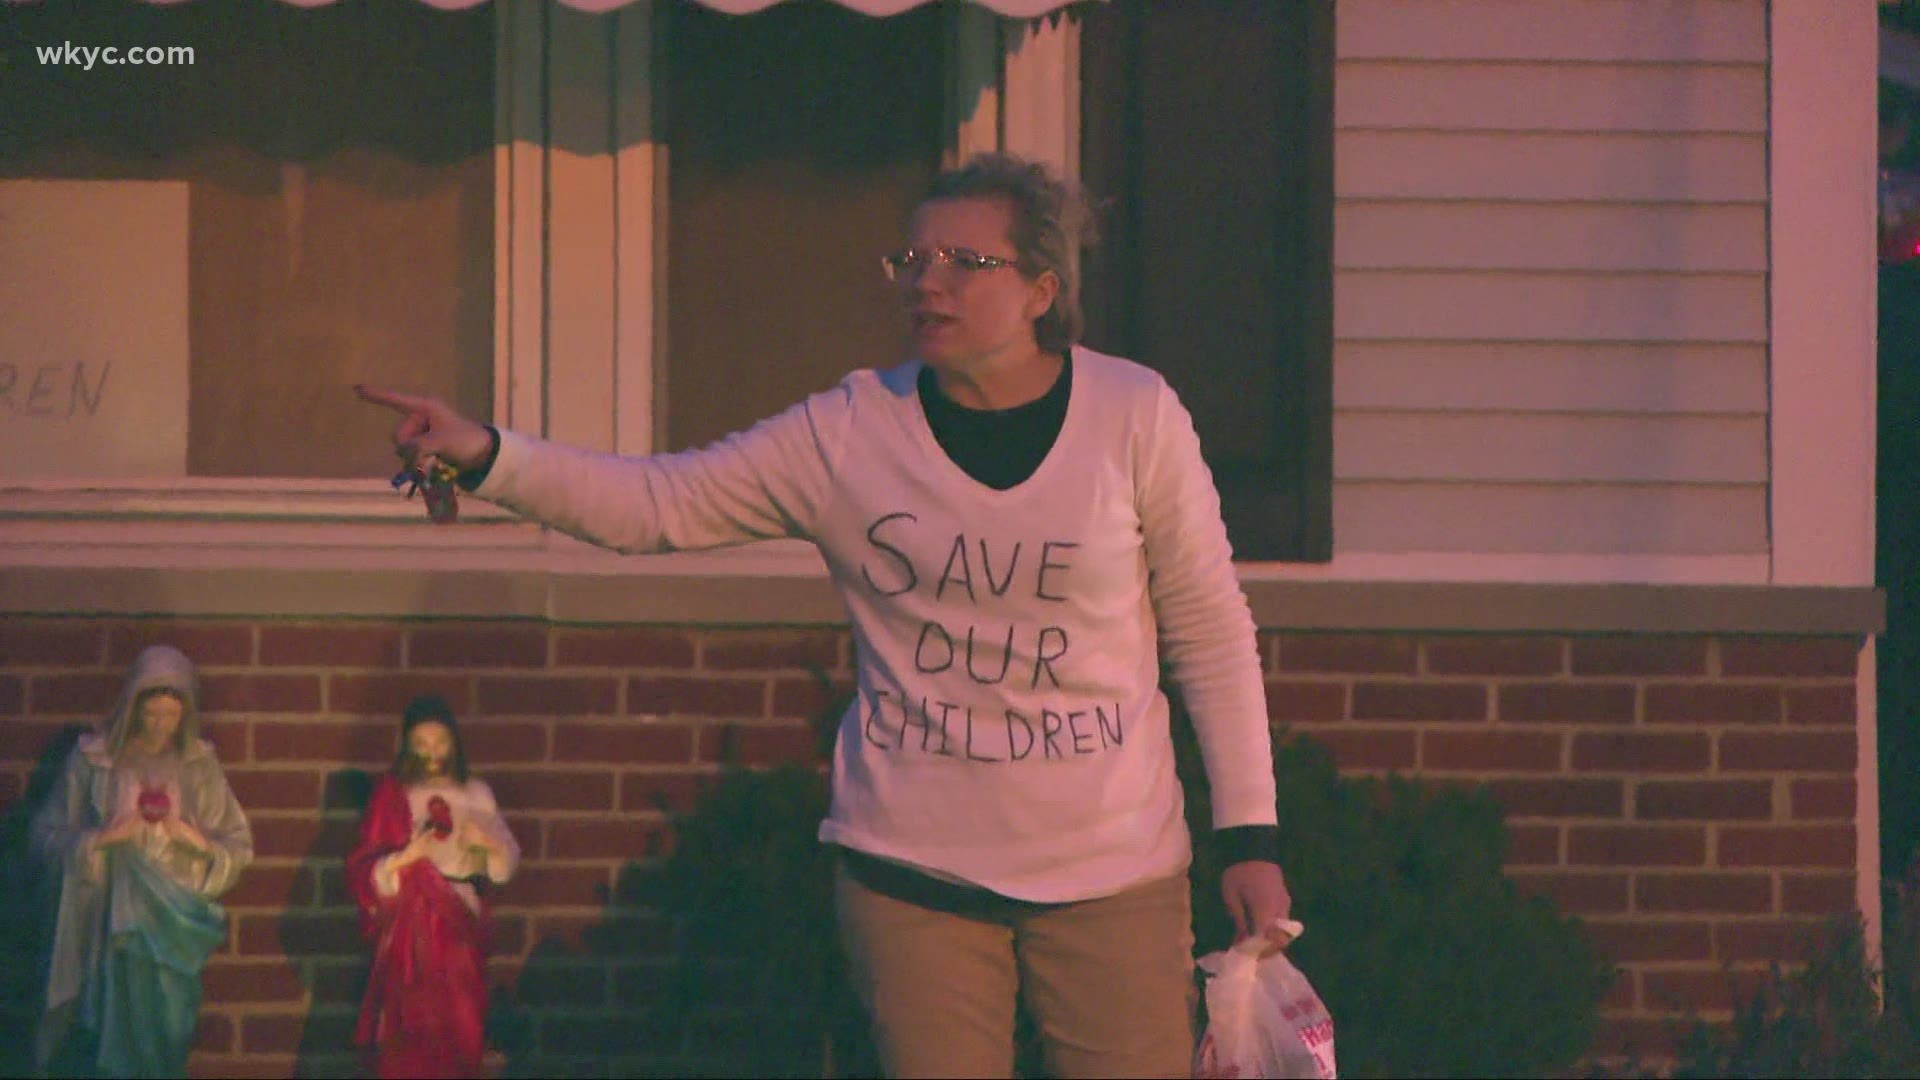 Christine Priola returned to her Willoughby home after posting $20,000 bail. She was seen wearing a shirt that said "Save the children."